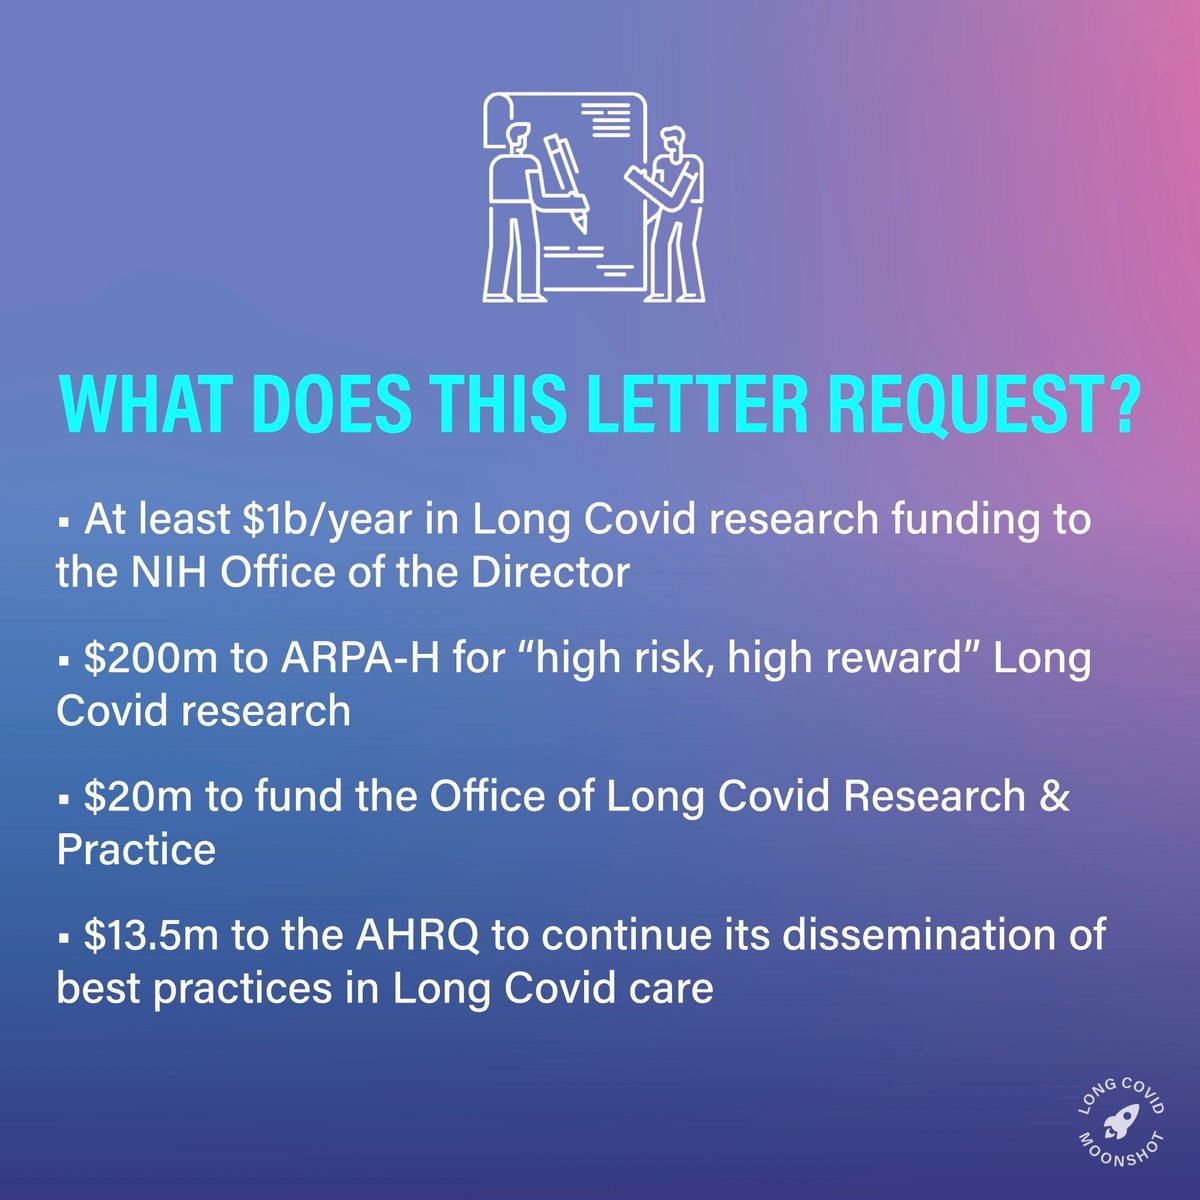 NEW CAMPAIGN ALERT 🚀

We are calling Congress to ensure #LongCovid research funding is included in the FY25 budget.

Senators Markey, Kaine, and Duckworth have cosponsored a letter calling for $1B+ in funding. It needs more signatures by May 7th!

Guide: longcovidmoonshot.com/call-guide